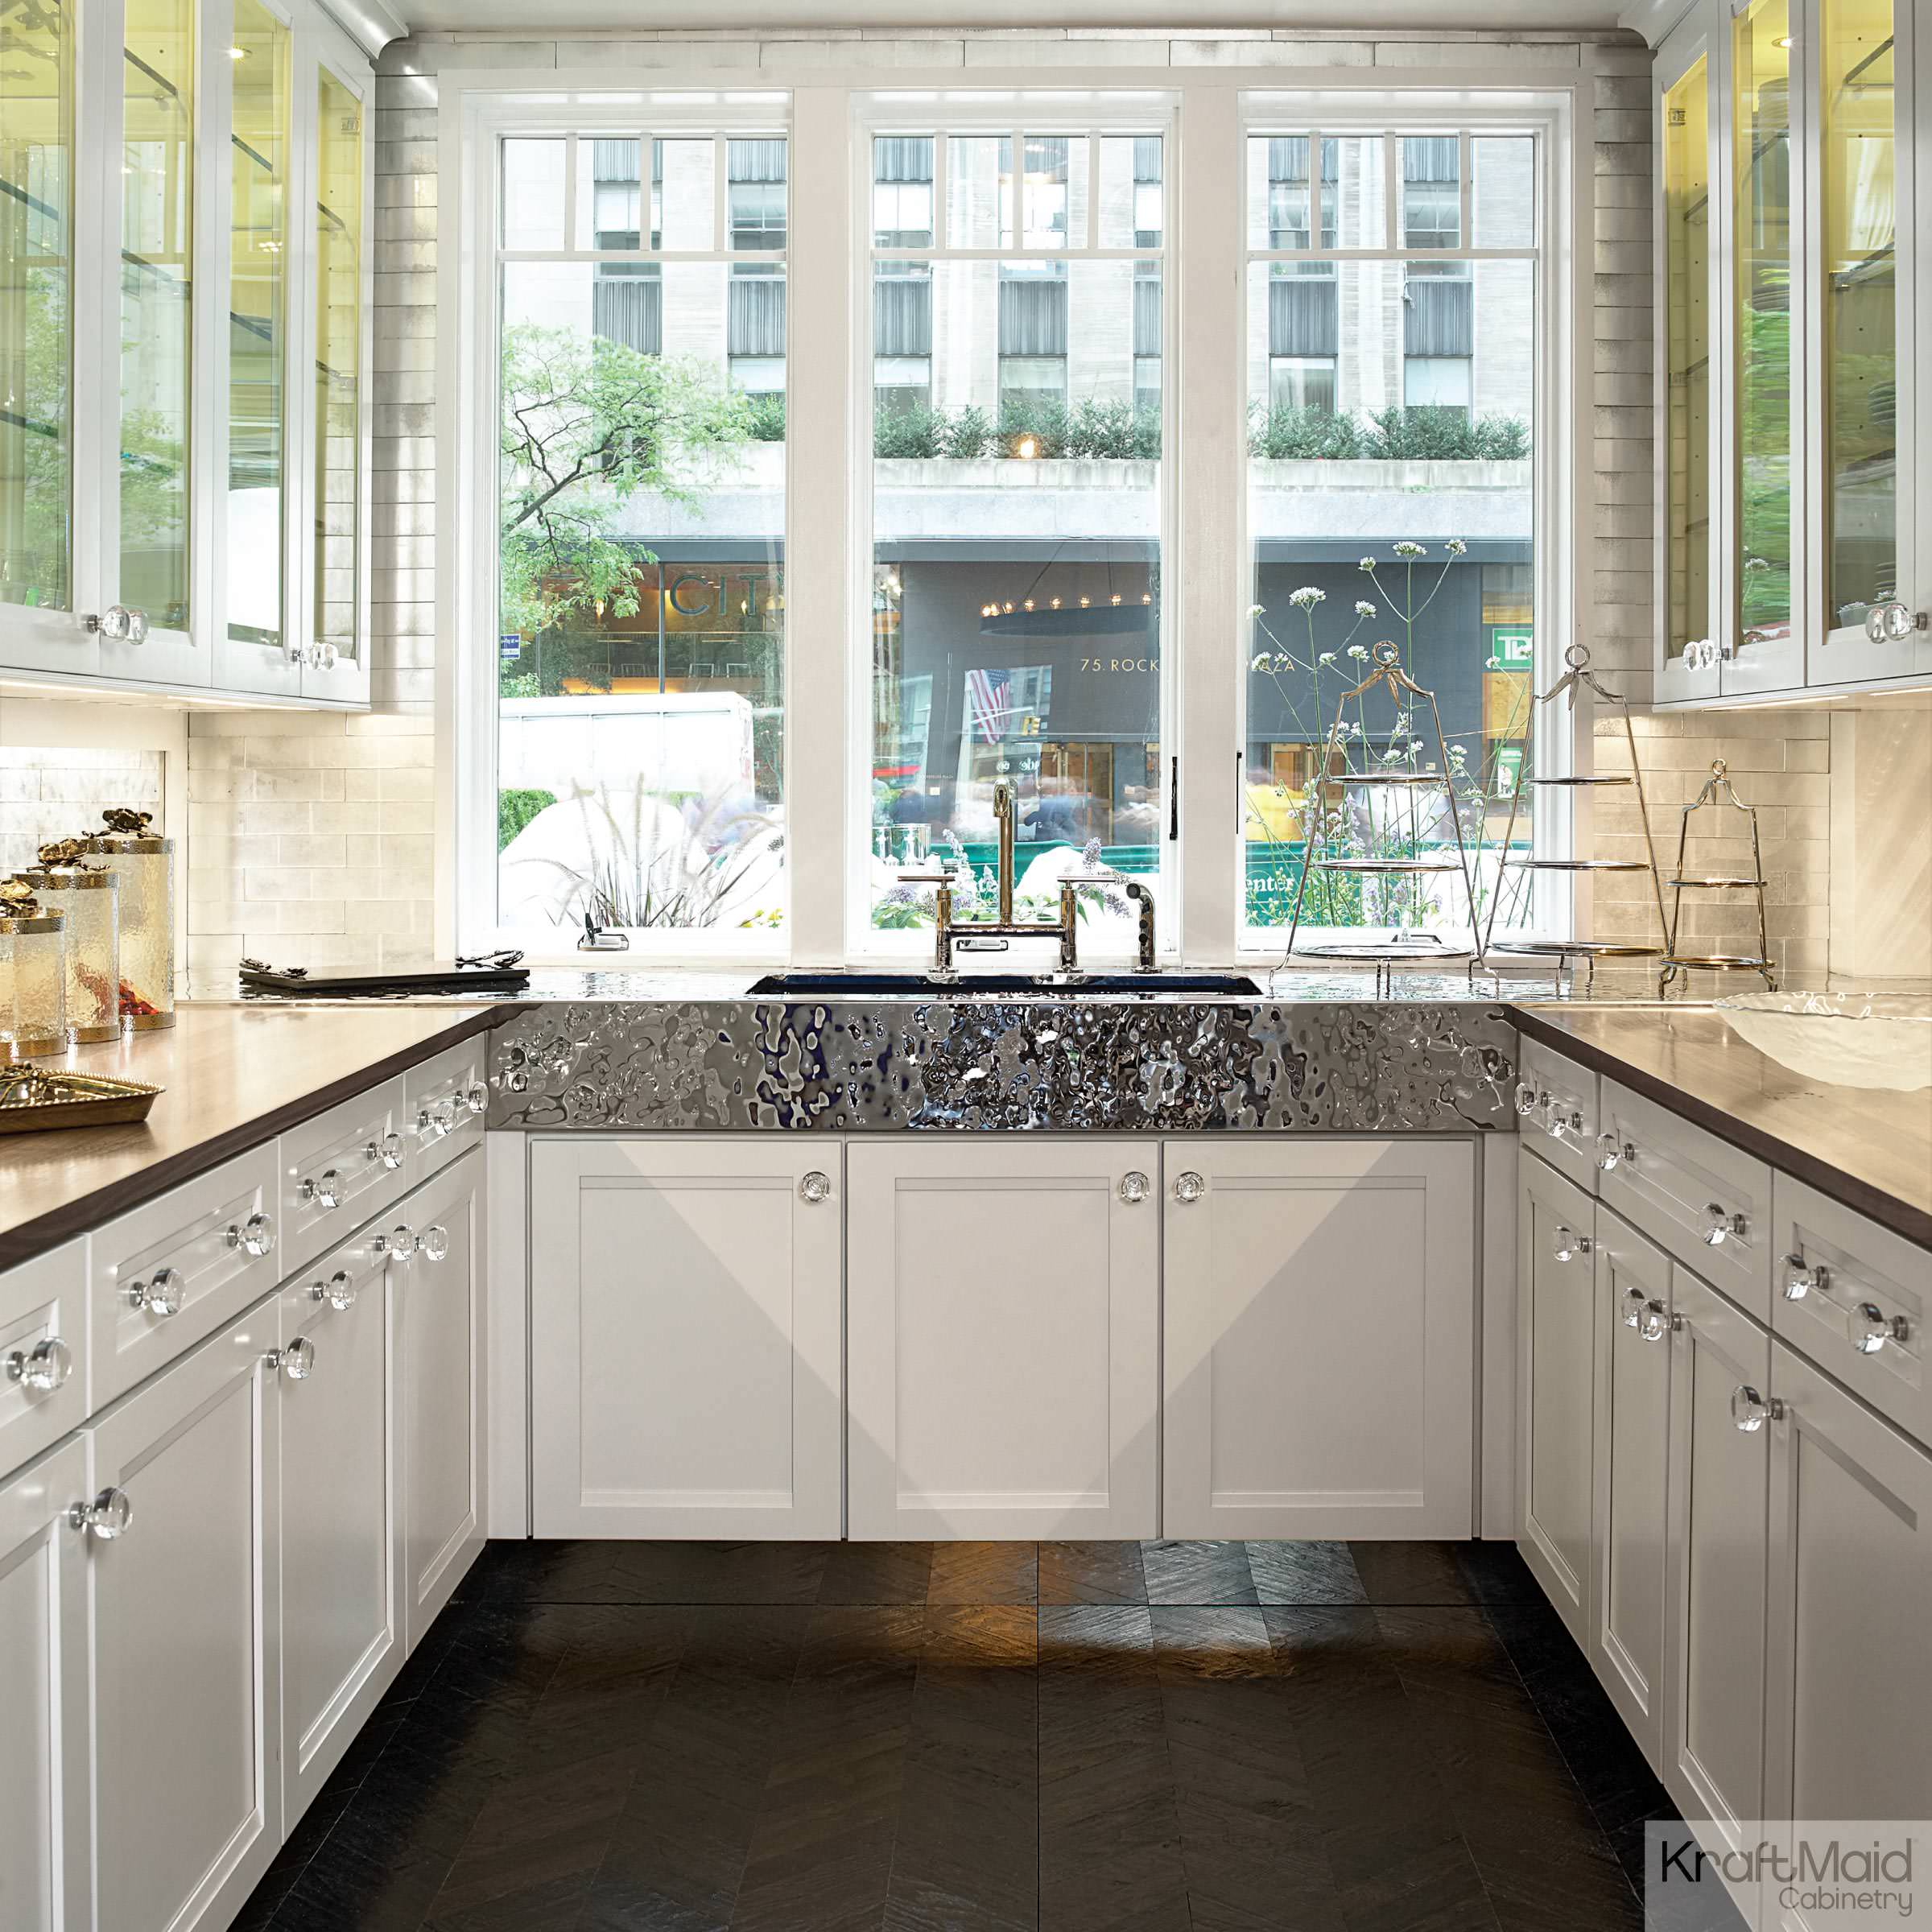 KraftMaid: Maple Cabinetry in Dove White - Traditional - Kitchen - New York  - by KraftMaid | Houzz